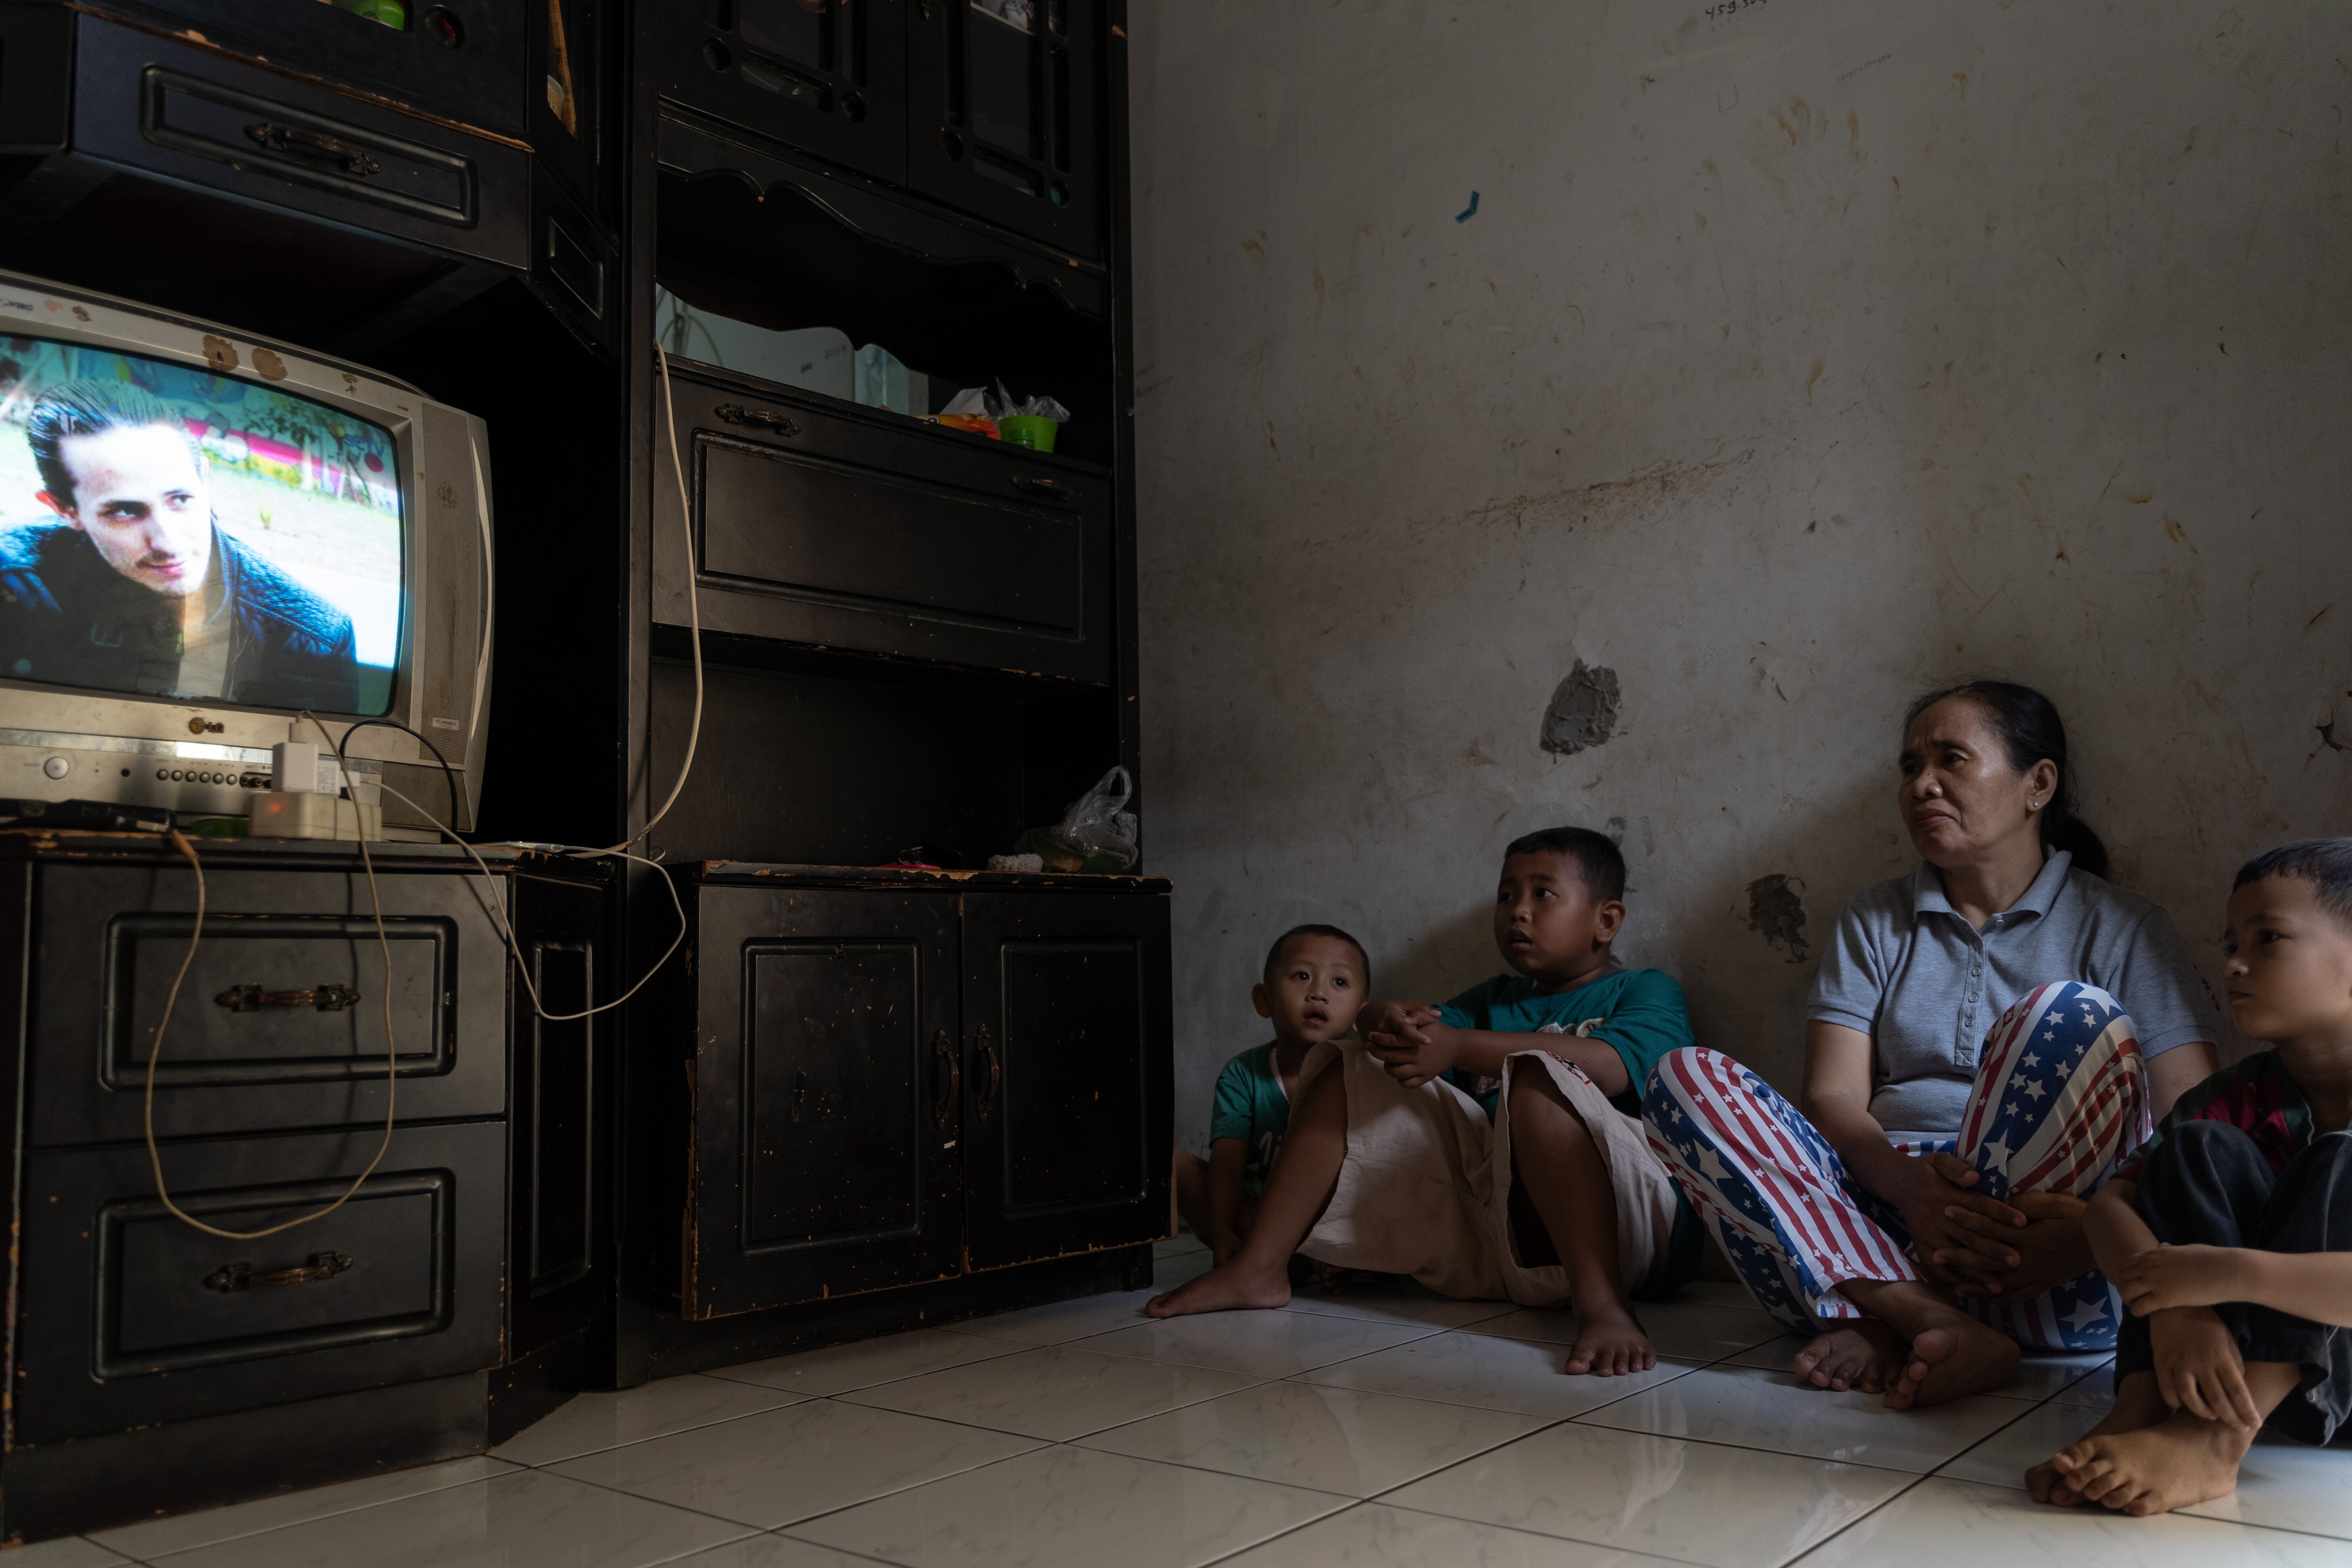 A family at home in West Jakarta, Indonesia, watch a sinetron TV show. Photo: Thomas Cristofoletti / Ruom